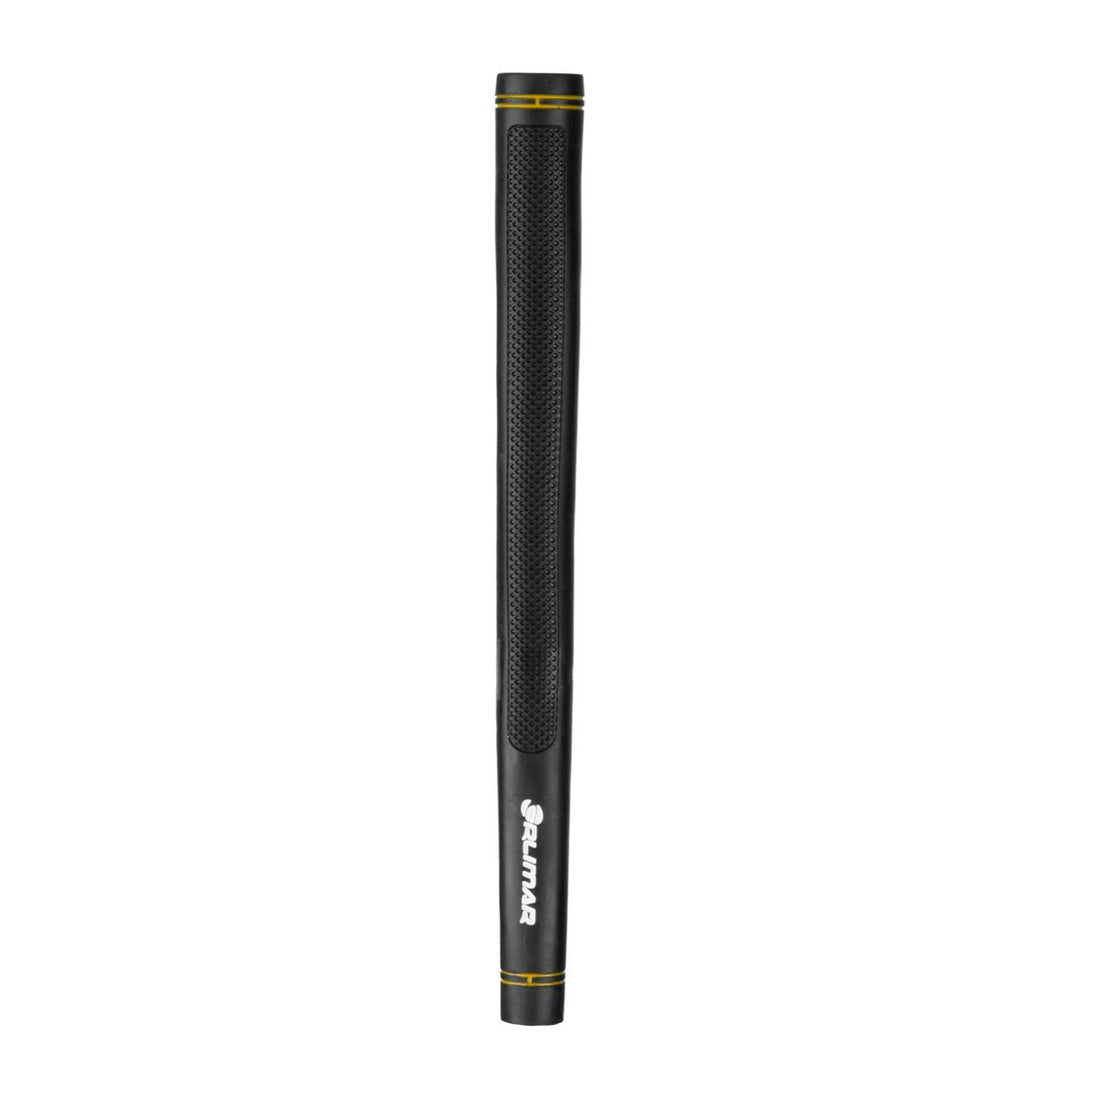 Orlimar ATS Junior Yellow Series black putter grip with white and yellow accent colors